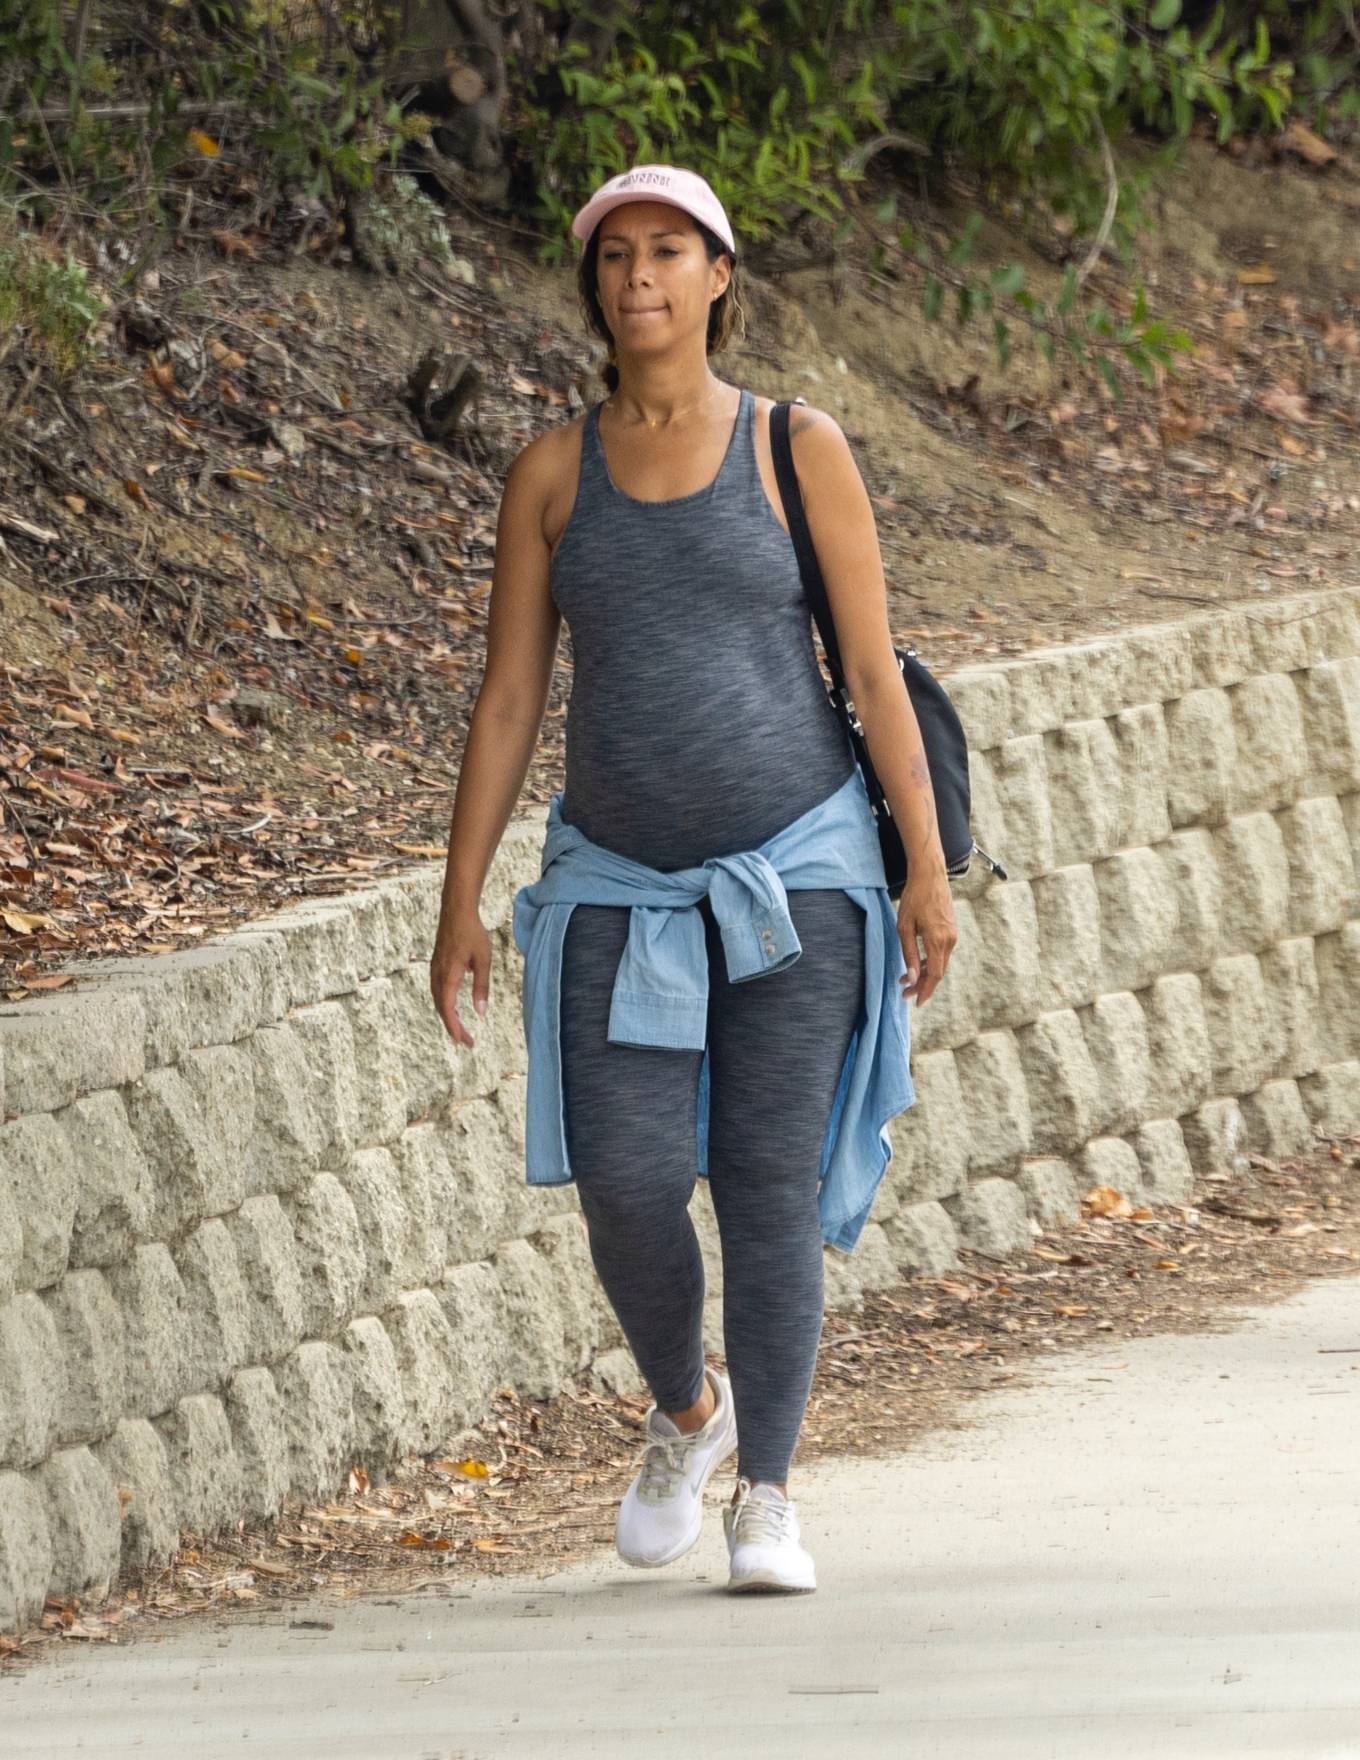 Leona Lewis - On a hike at the Hollywood Hills reservoir